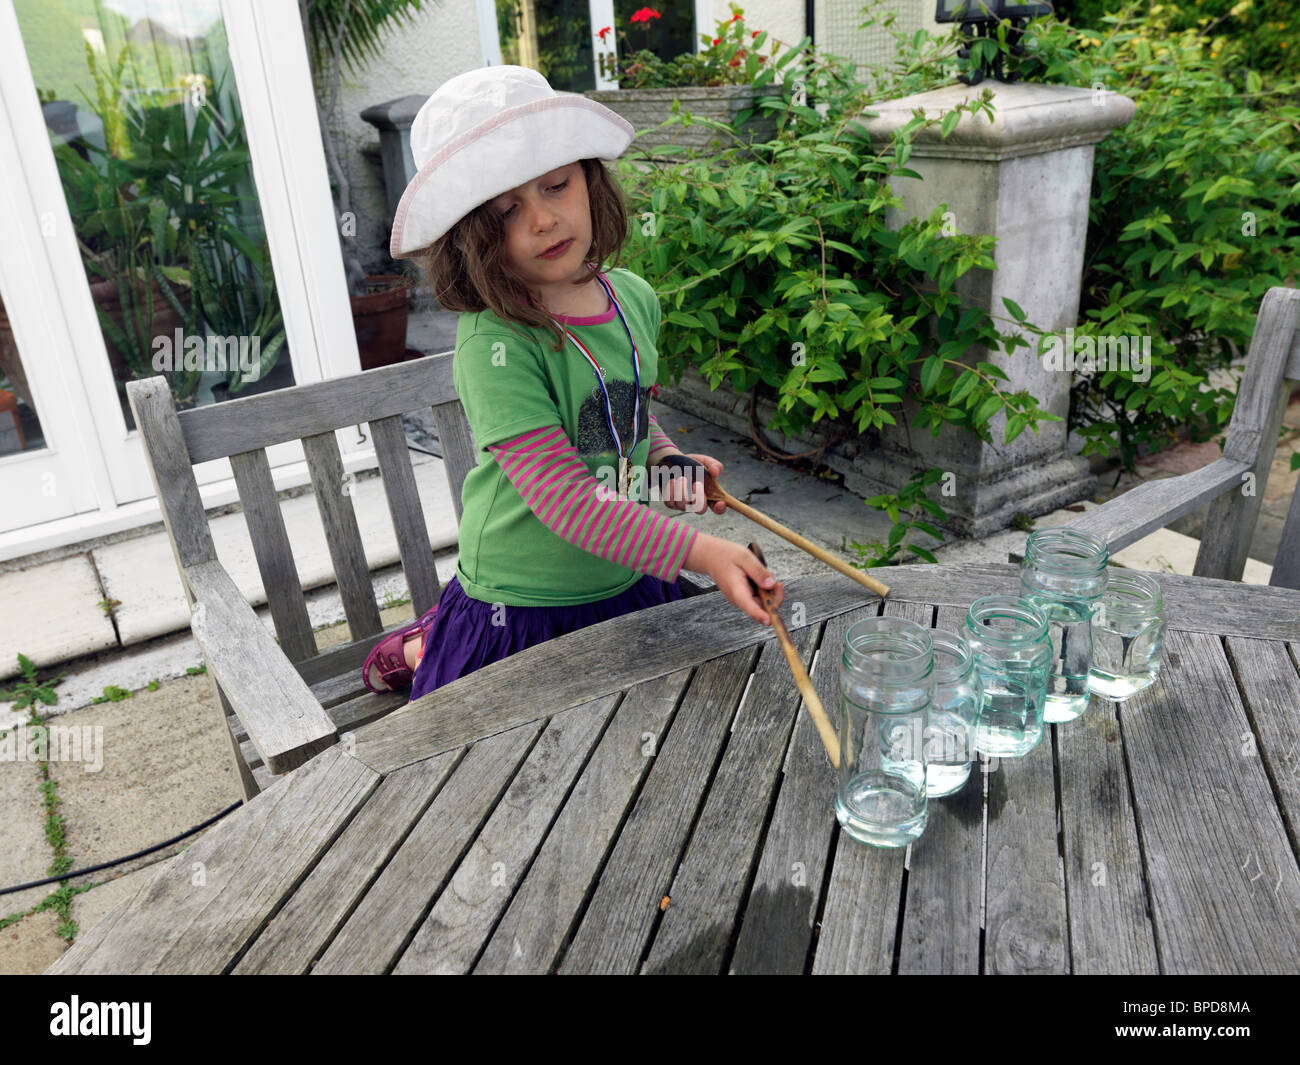 Young Girl Making Music Using Glass Jars Full Of Water And Hitting Them With Wooden Spoons Stock Photo